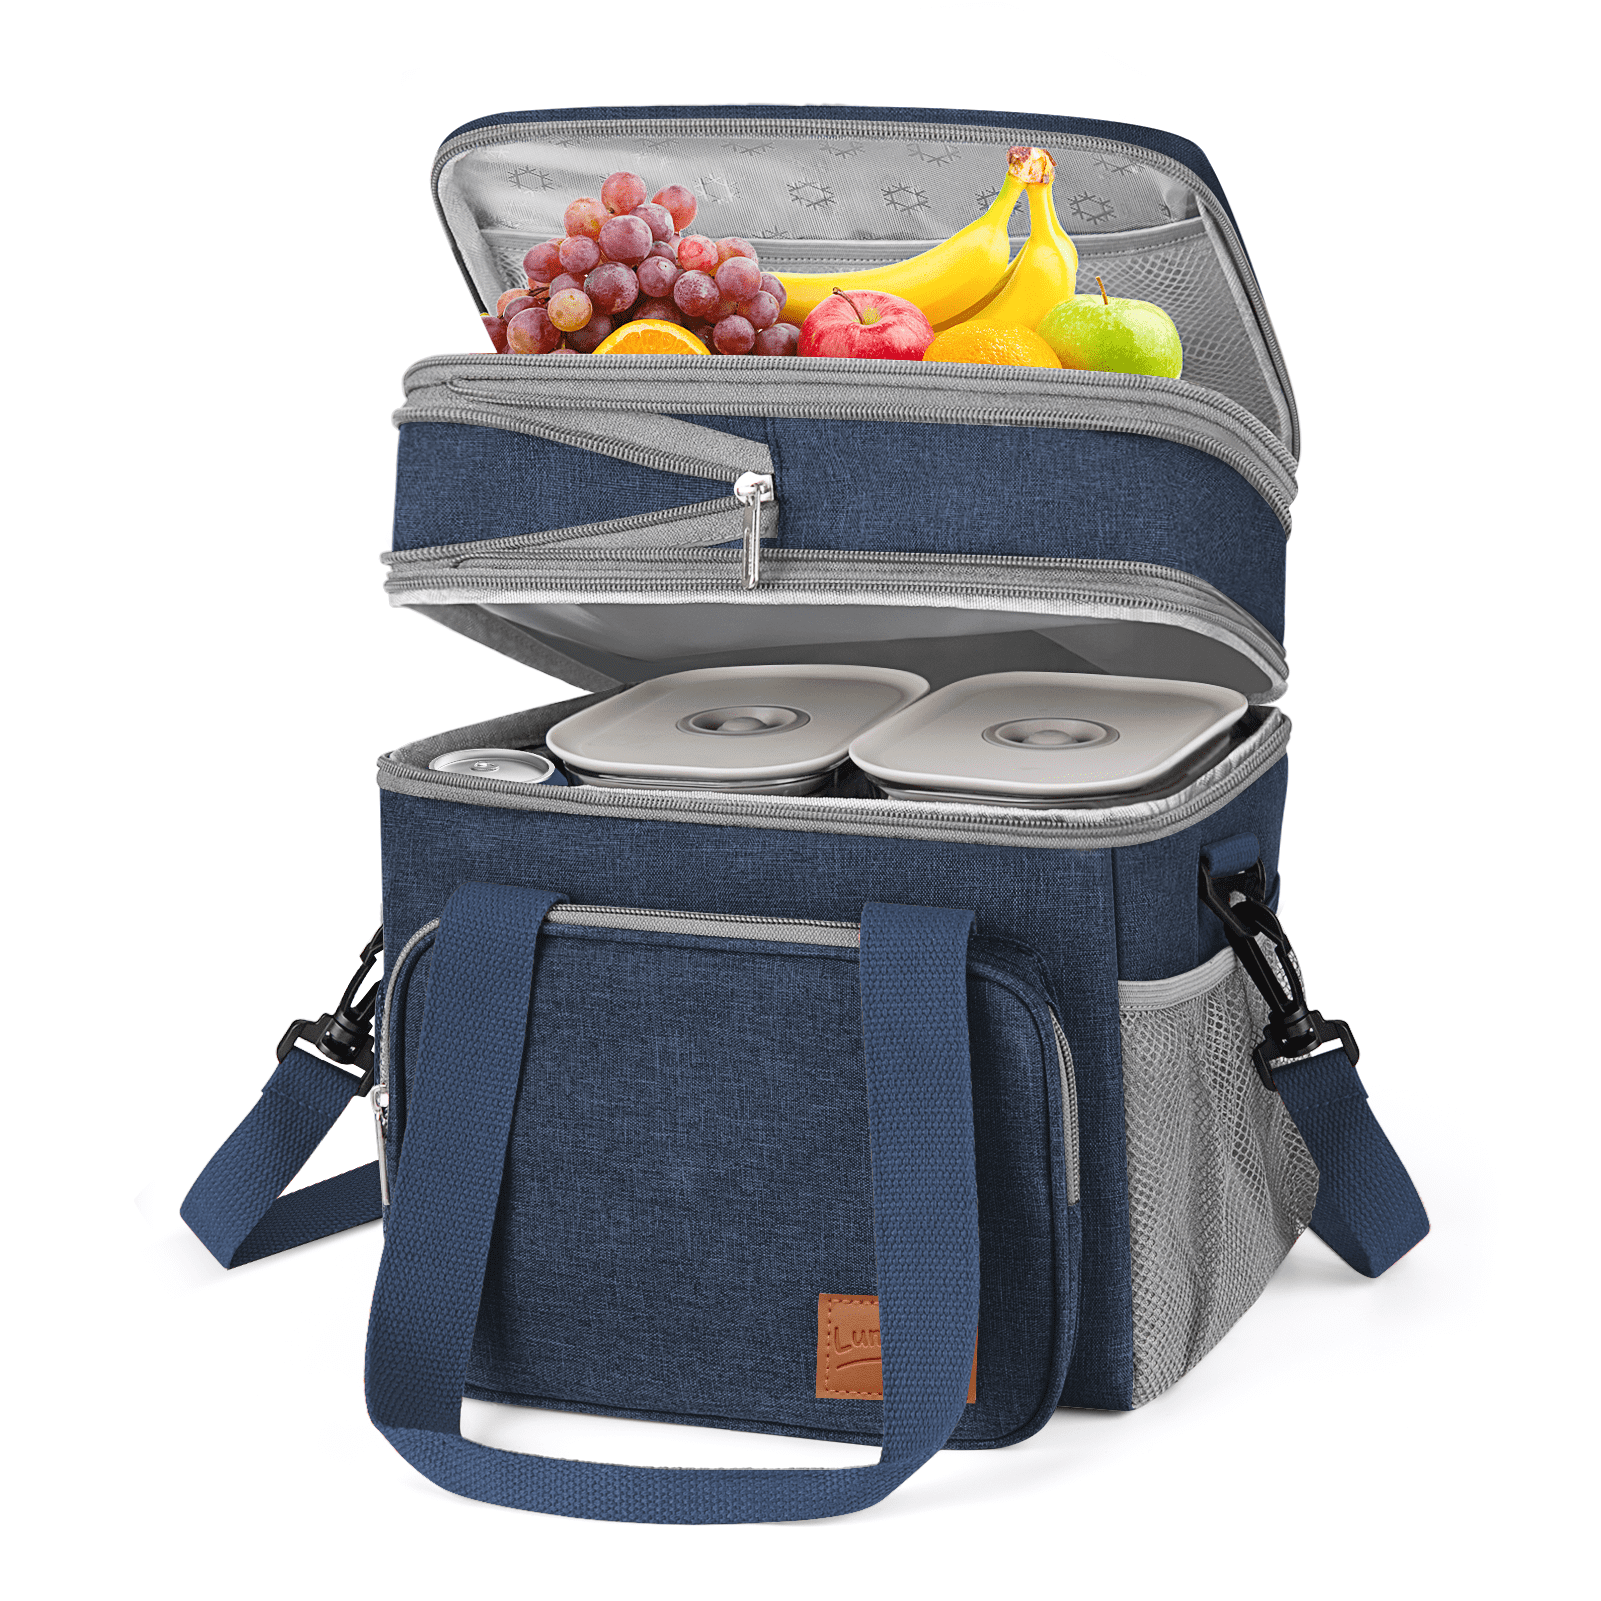 Insulated Lunch Bag Set Thermos Cooler Leakproof Tote Food Box for